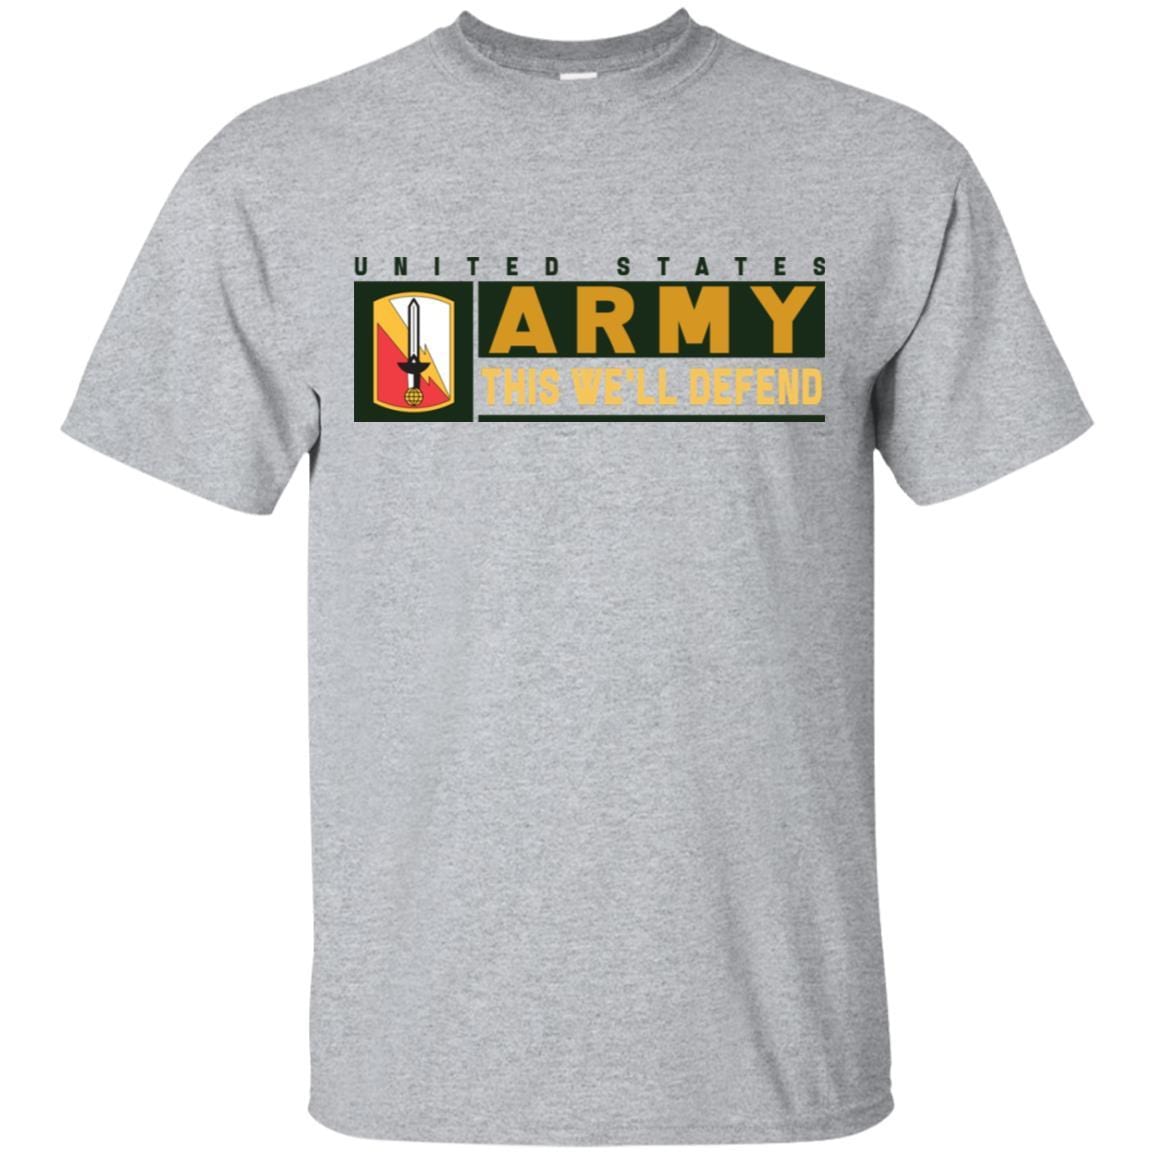 US Army 21ST SIGNAL BRIGADE- This We'll Defend T-Shirt On Front For Men-TShirt-Army-Veterans Nation